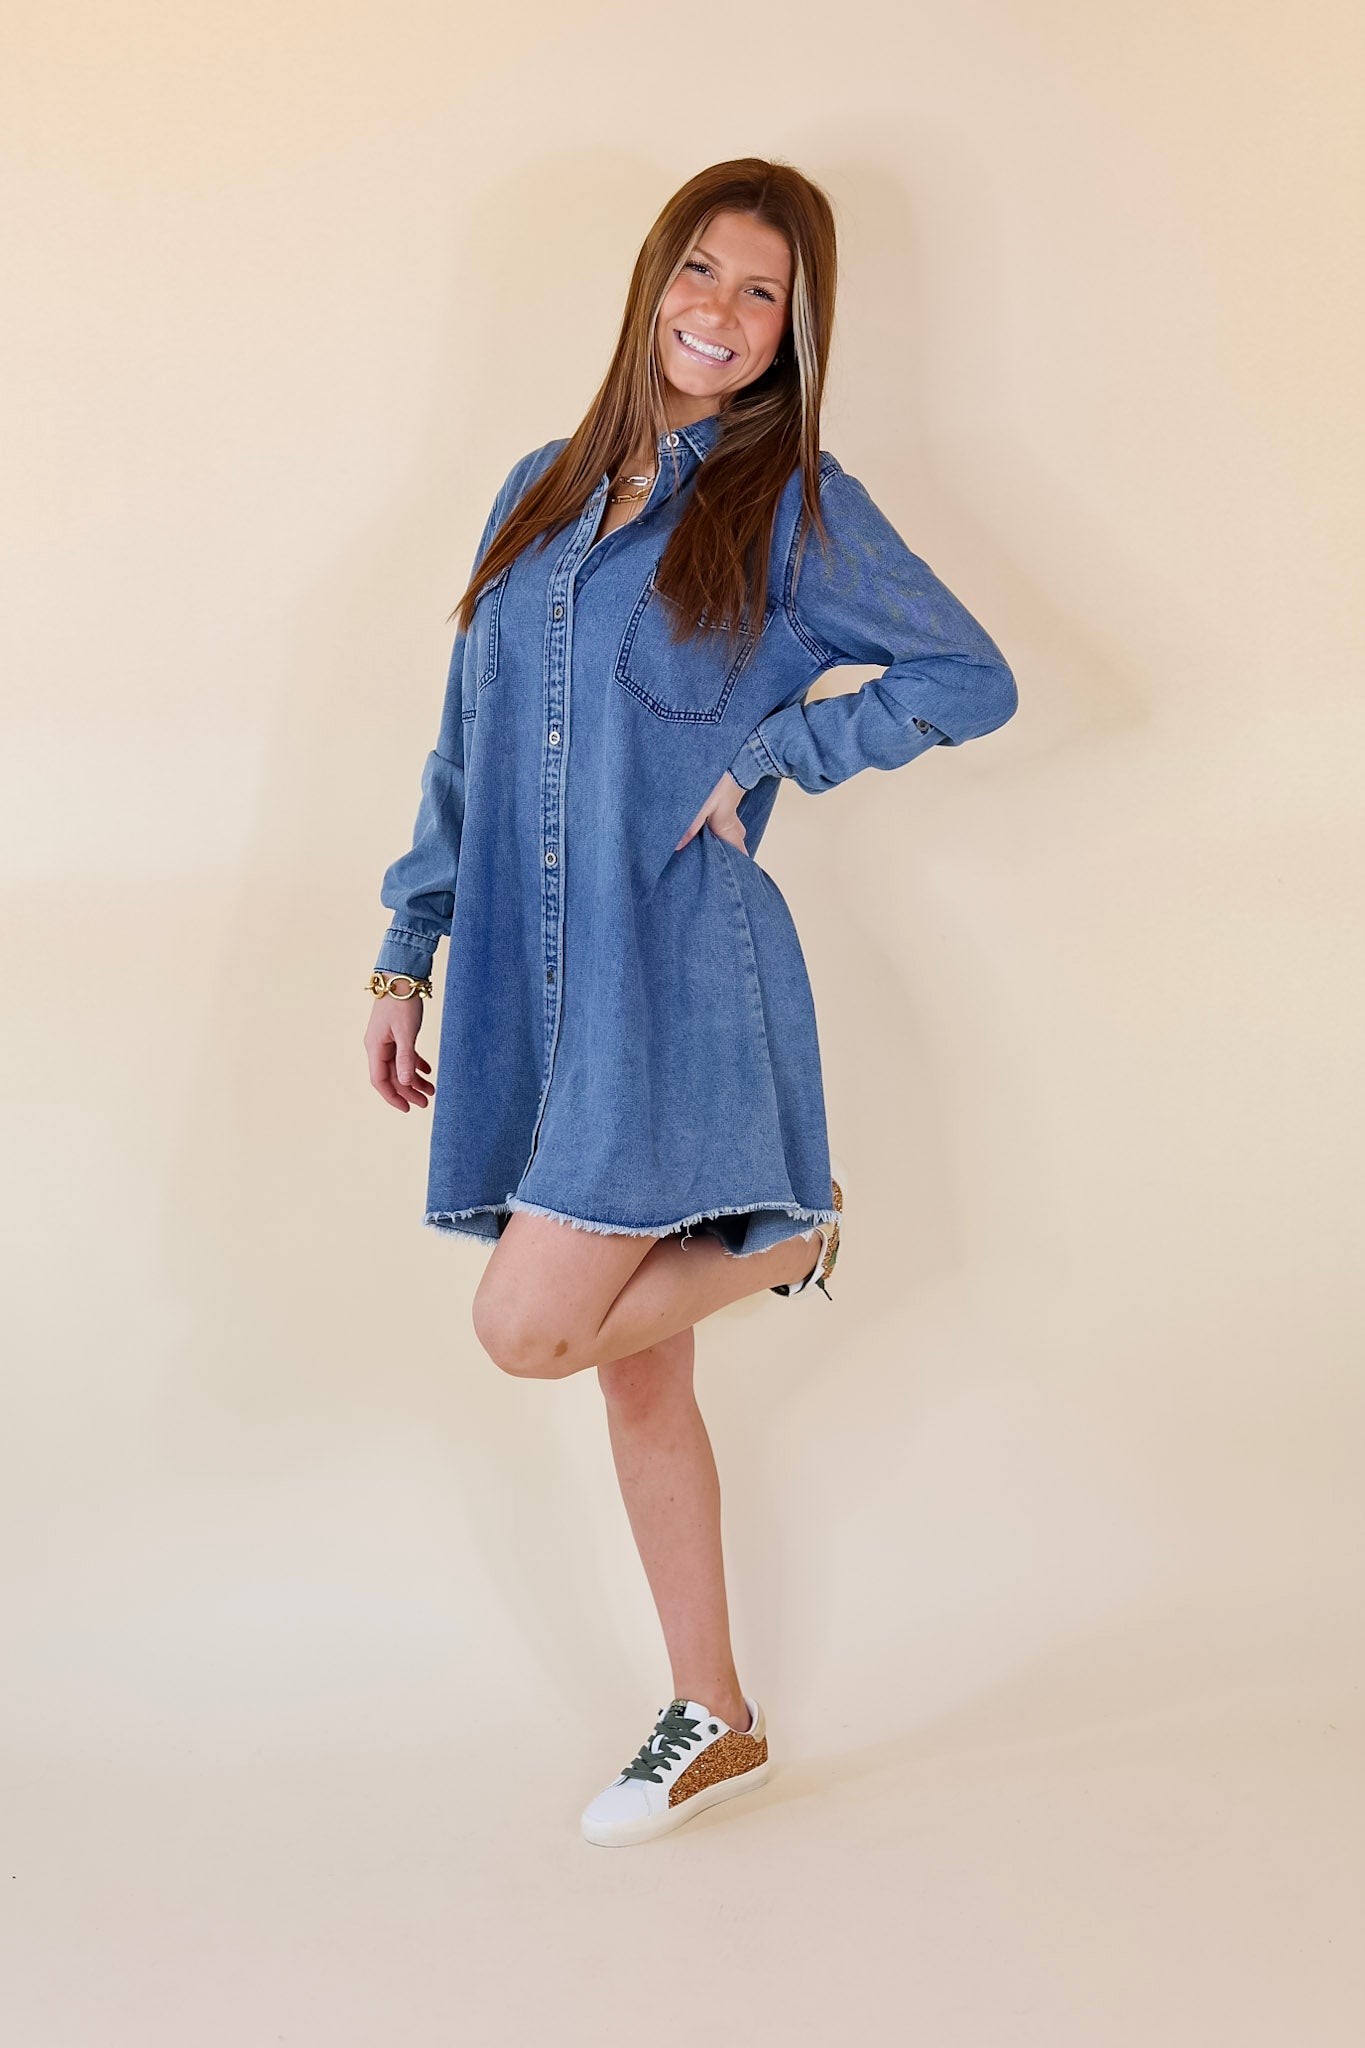 Patio Date Button Up Long Sleeve Denim Dress in Medium Wash - Giddy Up Glamour Boutique